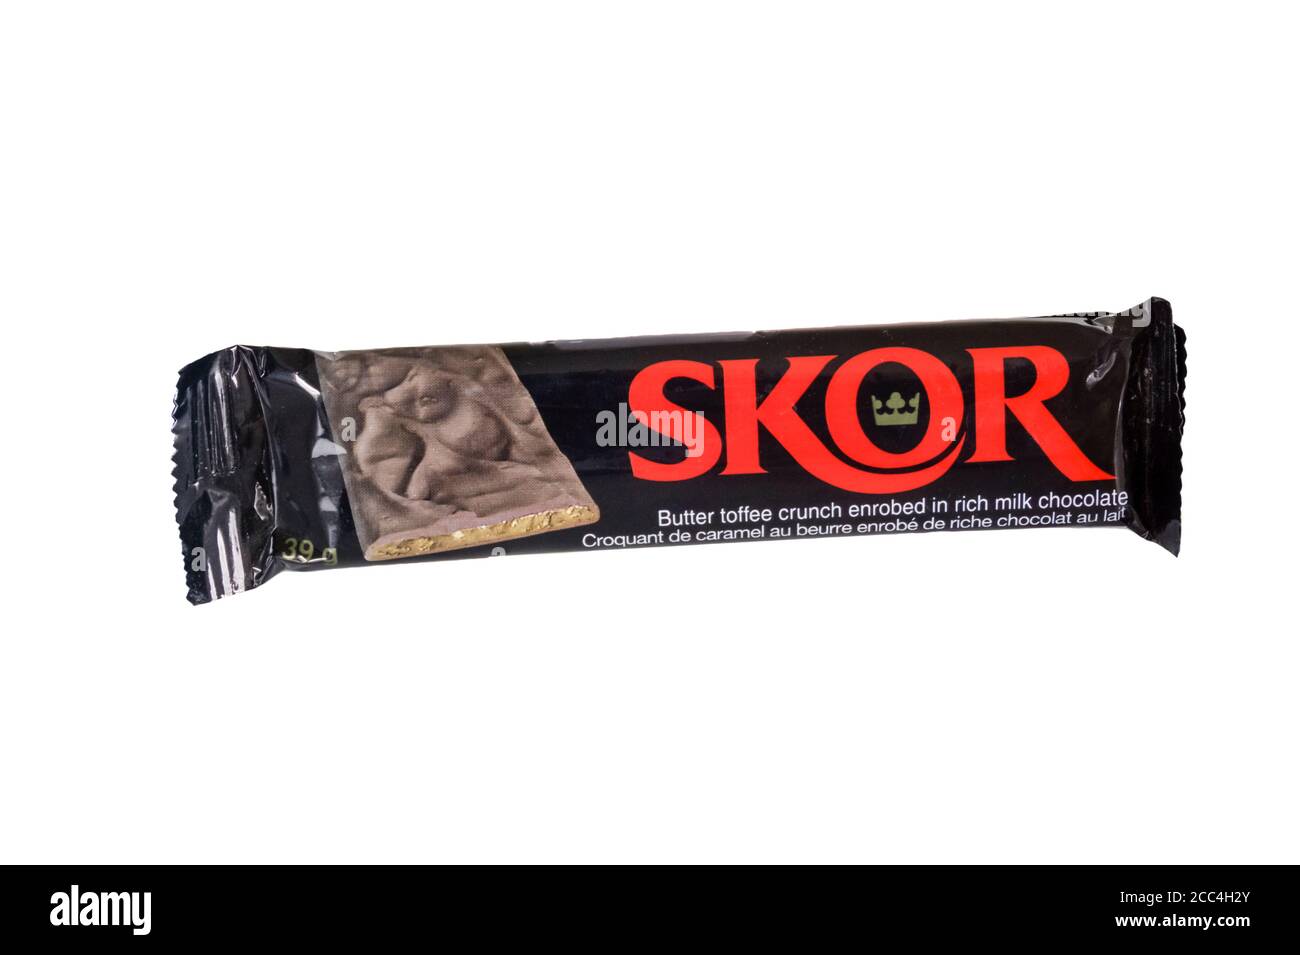 Skor High Resolution Stock Photography and Images - Alamy